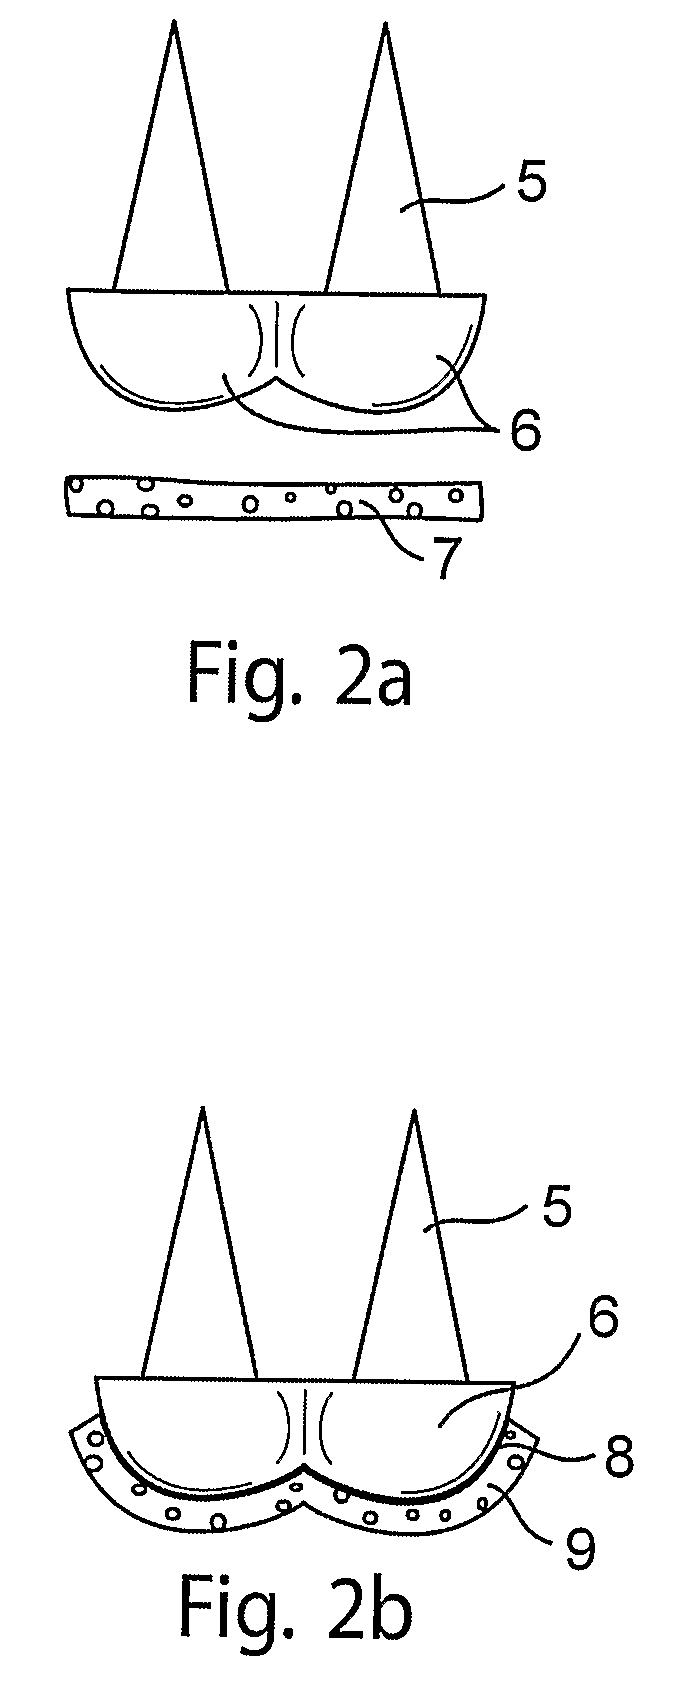 Implants and Methods for Repair, Replacement and Treatment of Disease